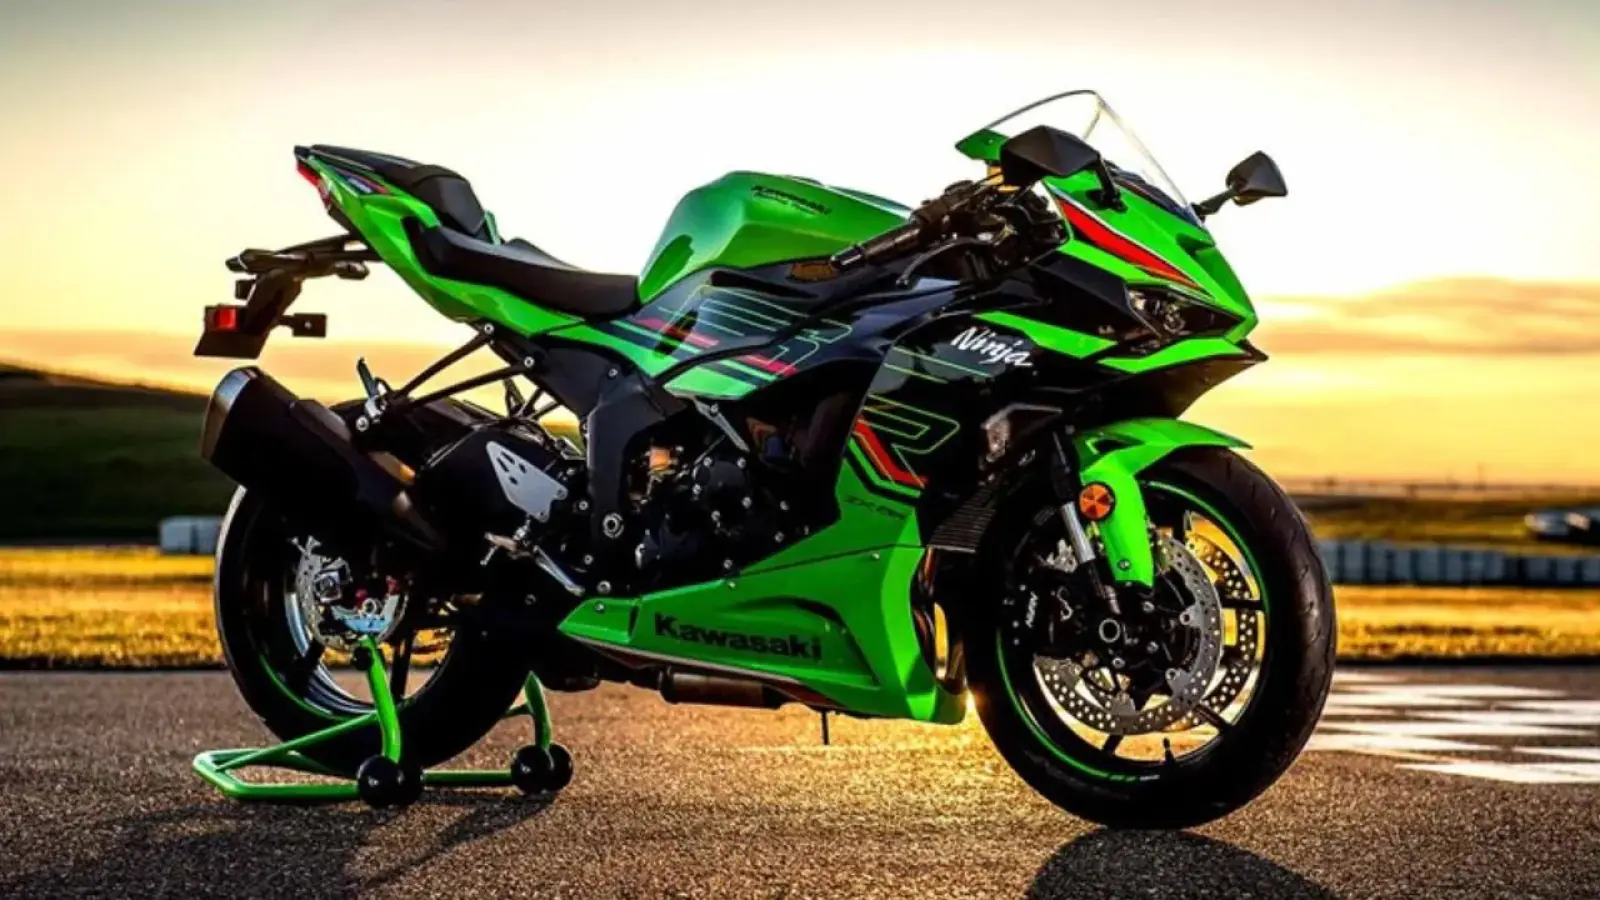 Kawasaki Ninja ZX-6R to be launched in India on January 1; Know the features, engine and possible price